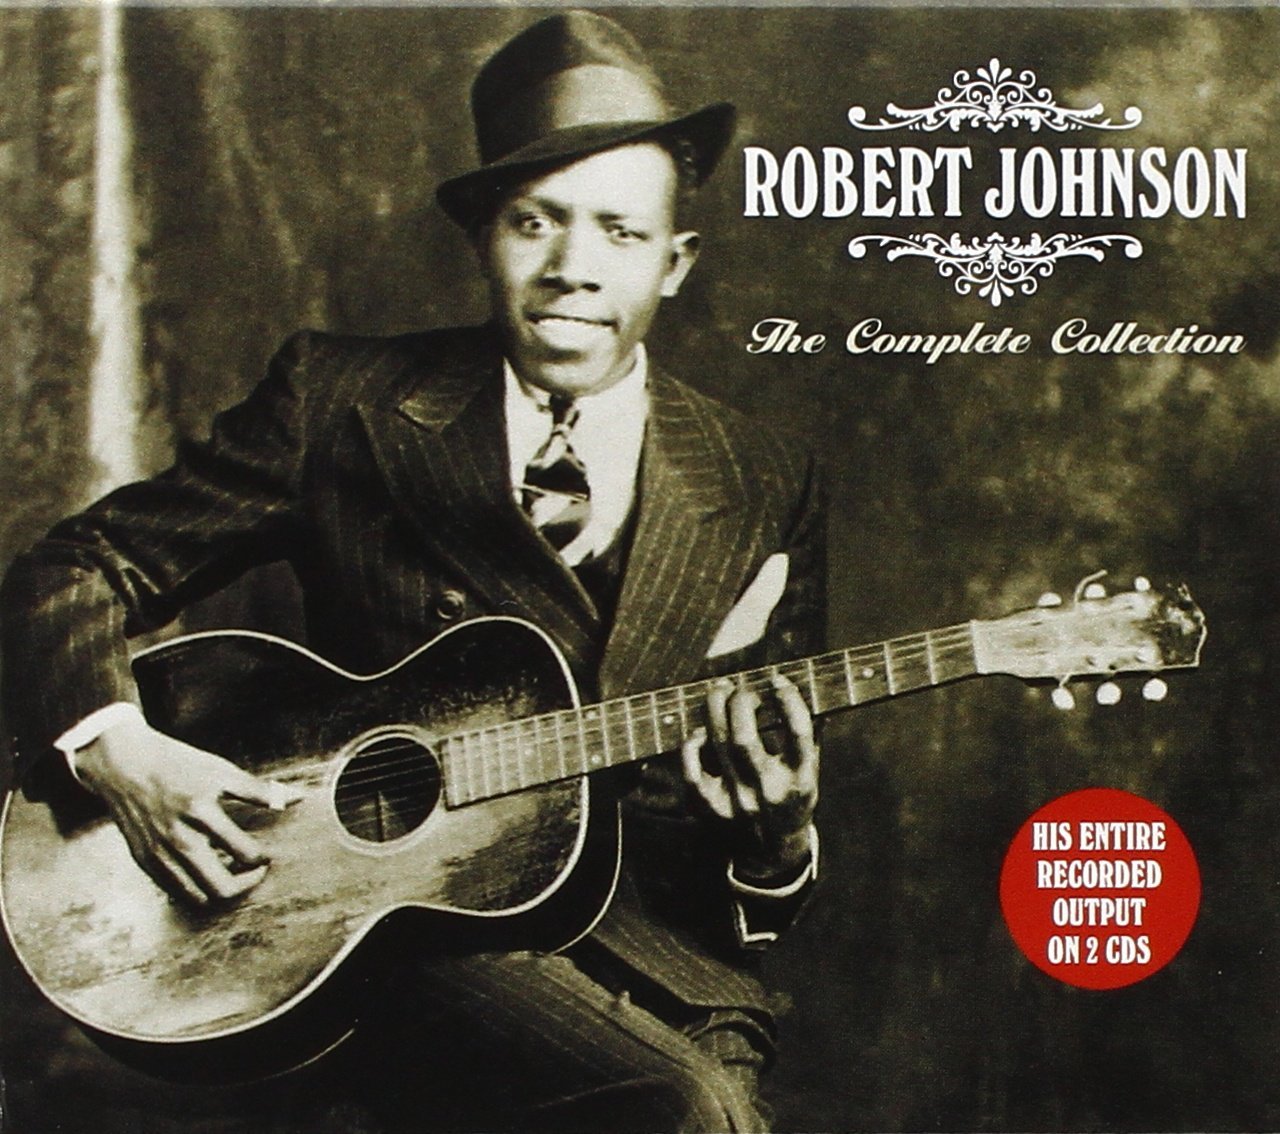 Robert Johnson - Complete Collection (Music CD)